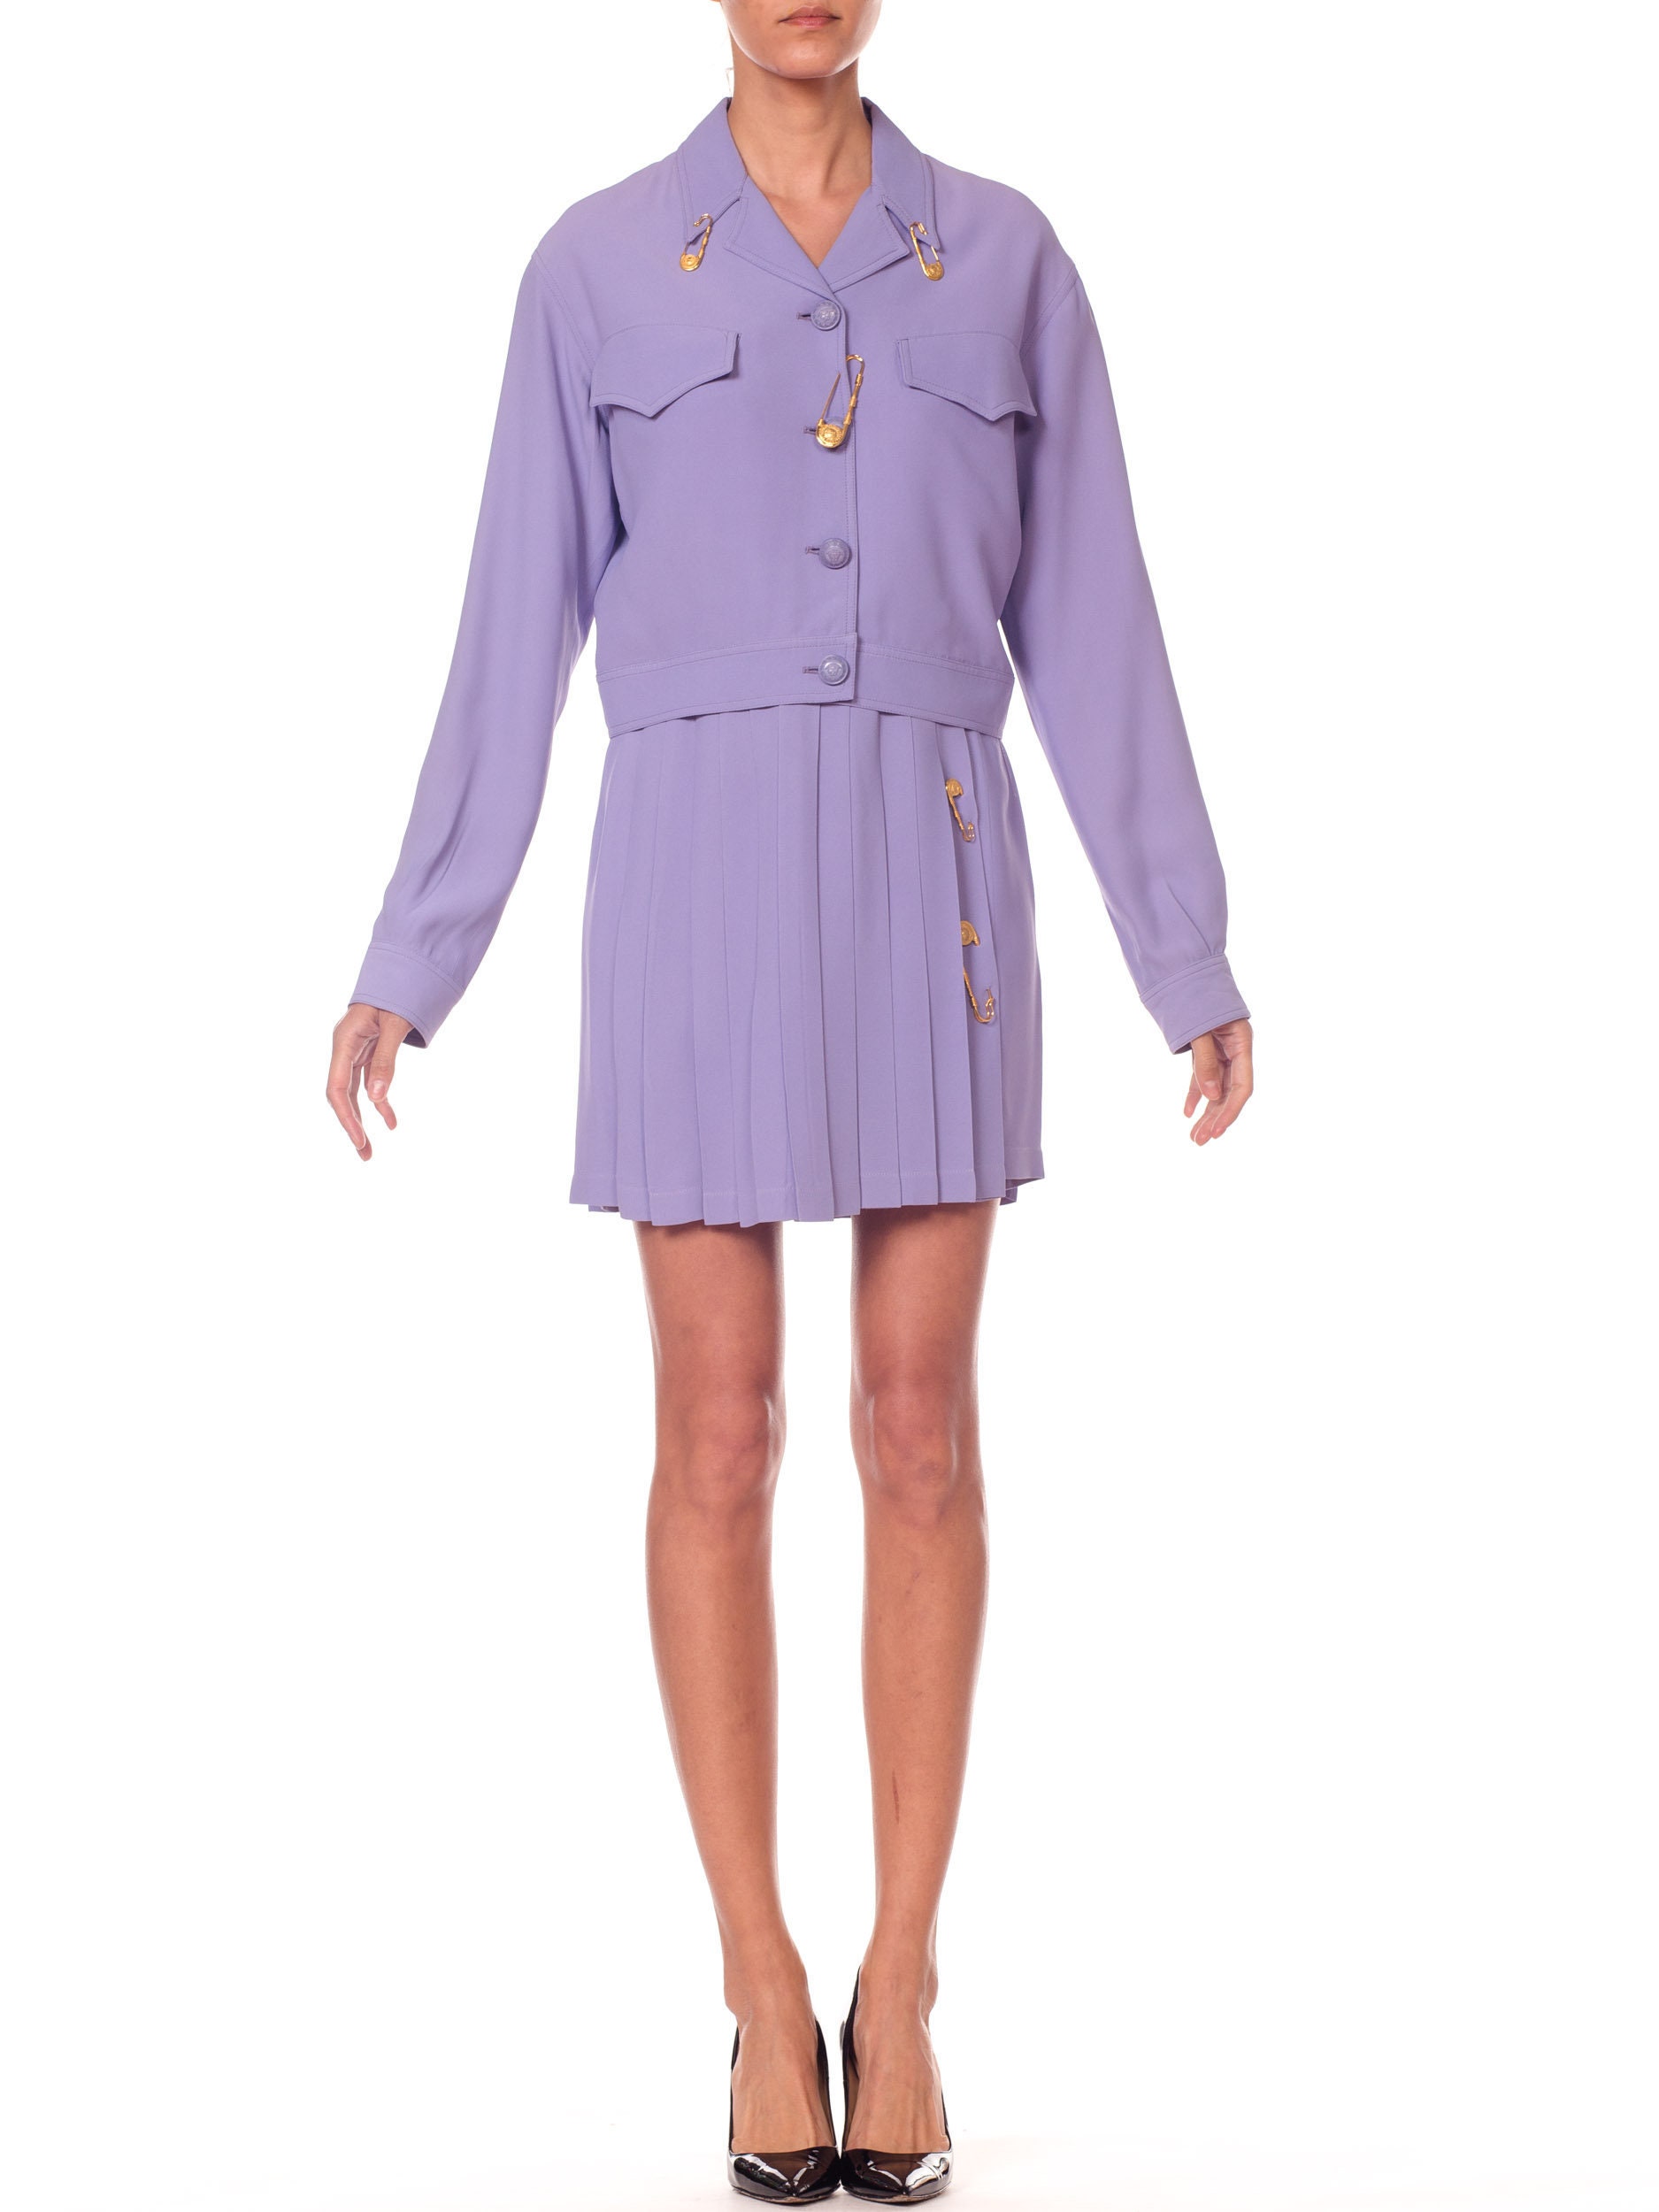 1990S Gianni Versace Lilac Rayon Blend Crepe Safety Pin Suit Skirt